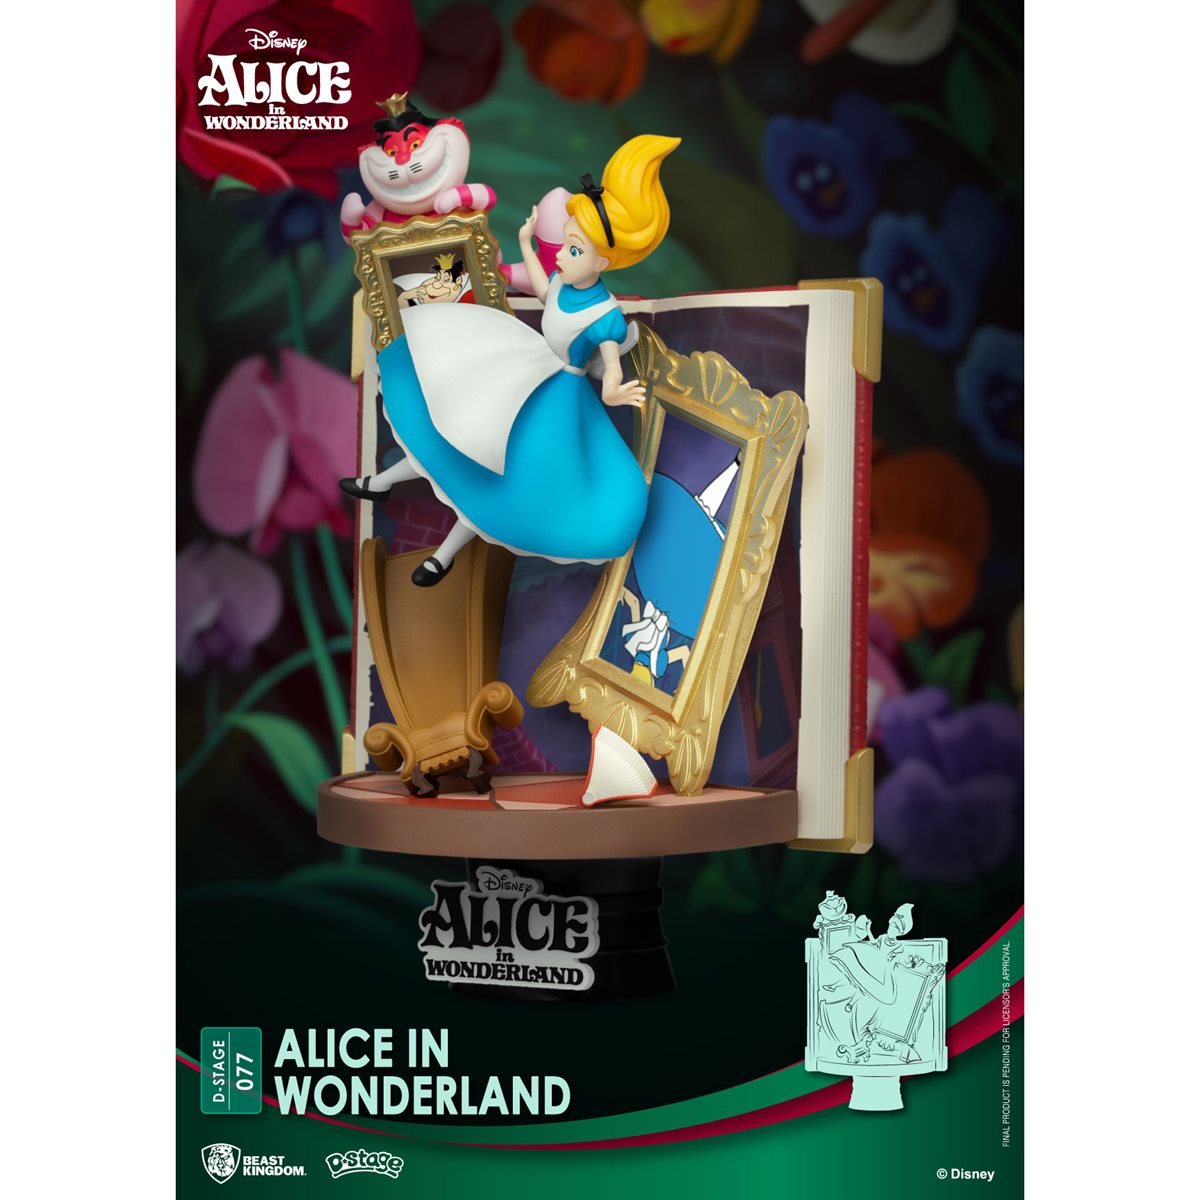 alice-in-wonderland-disney-story-book-series-alice-d-stage-ds-077-6-inch-statue